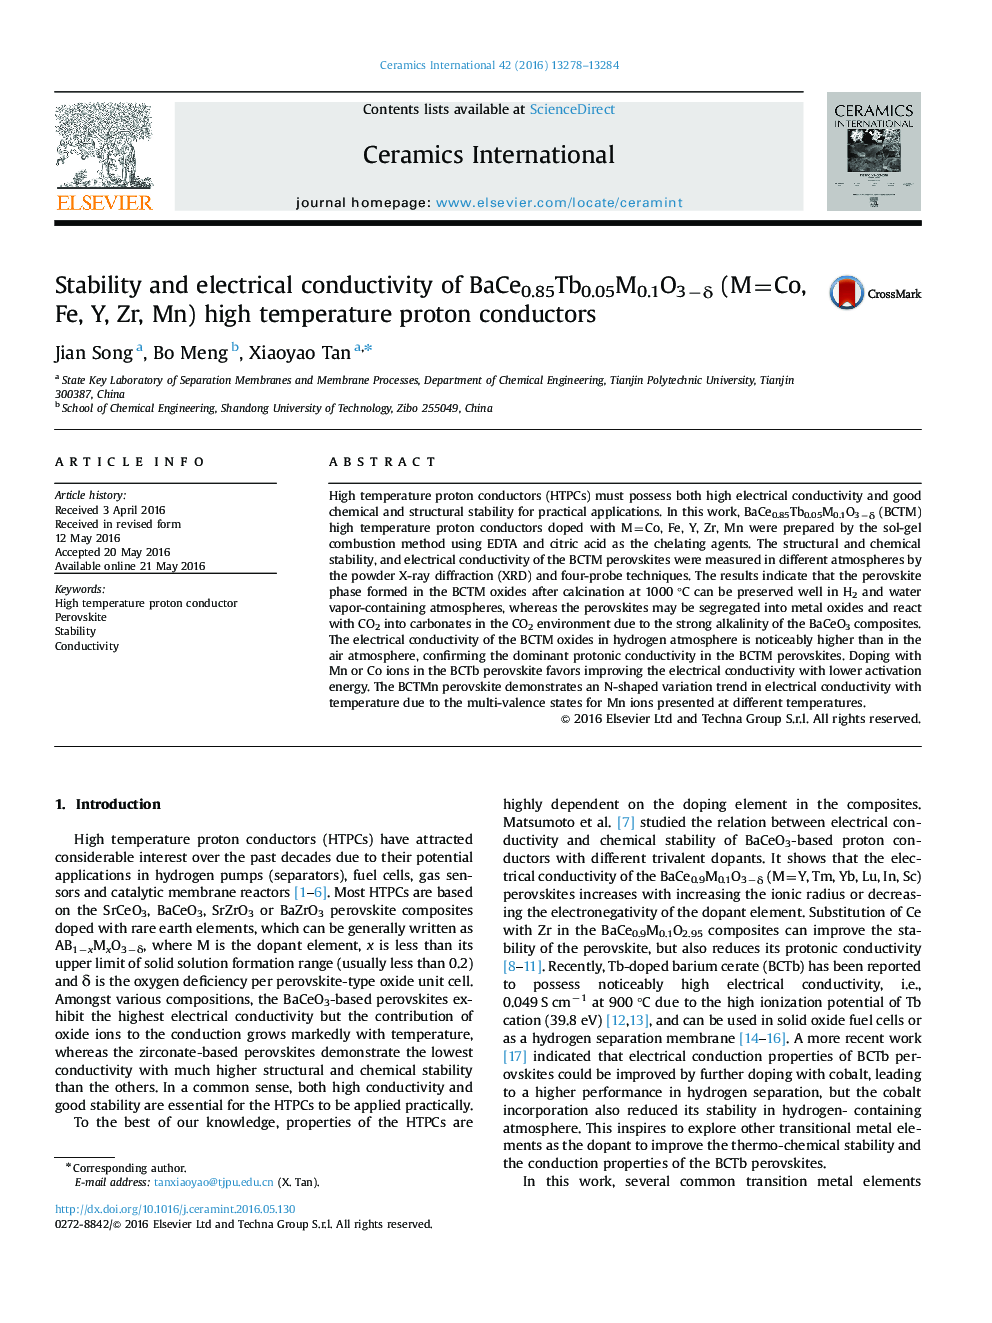 Stability and electrical conductivity of BaCe0.85Tb0.05M0.1O3−δ (M=Co, Fe, Y, Zr, Mn) high temperature proton conductors